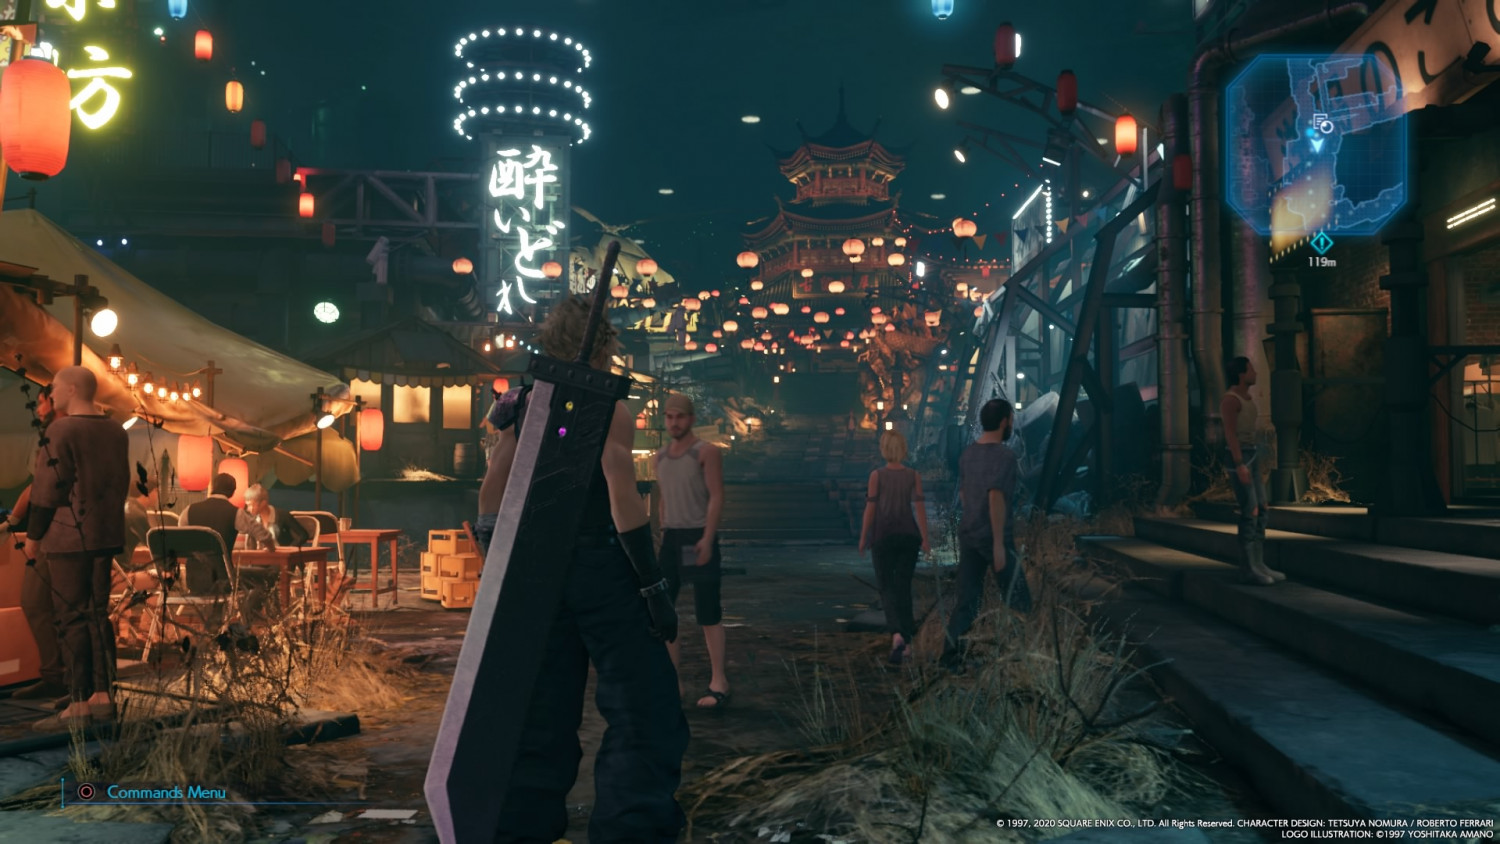 Review: Final Fantasy VII Remake summons back a timeless classic